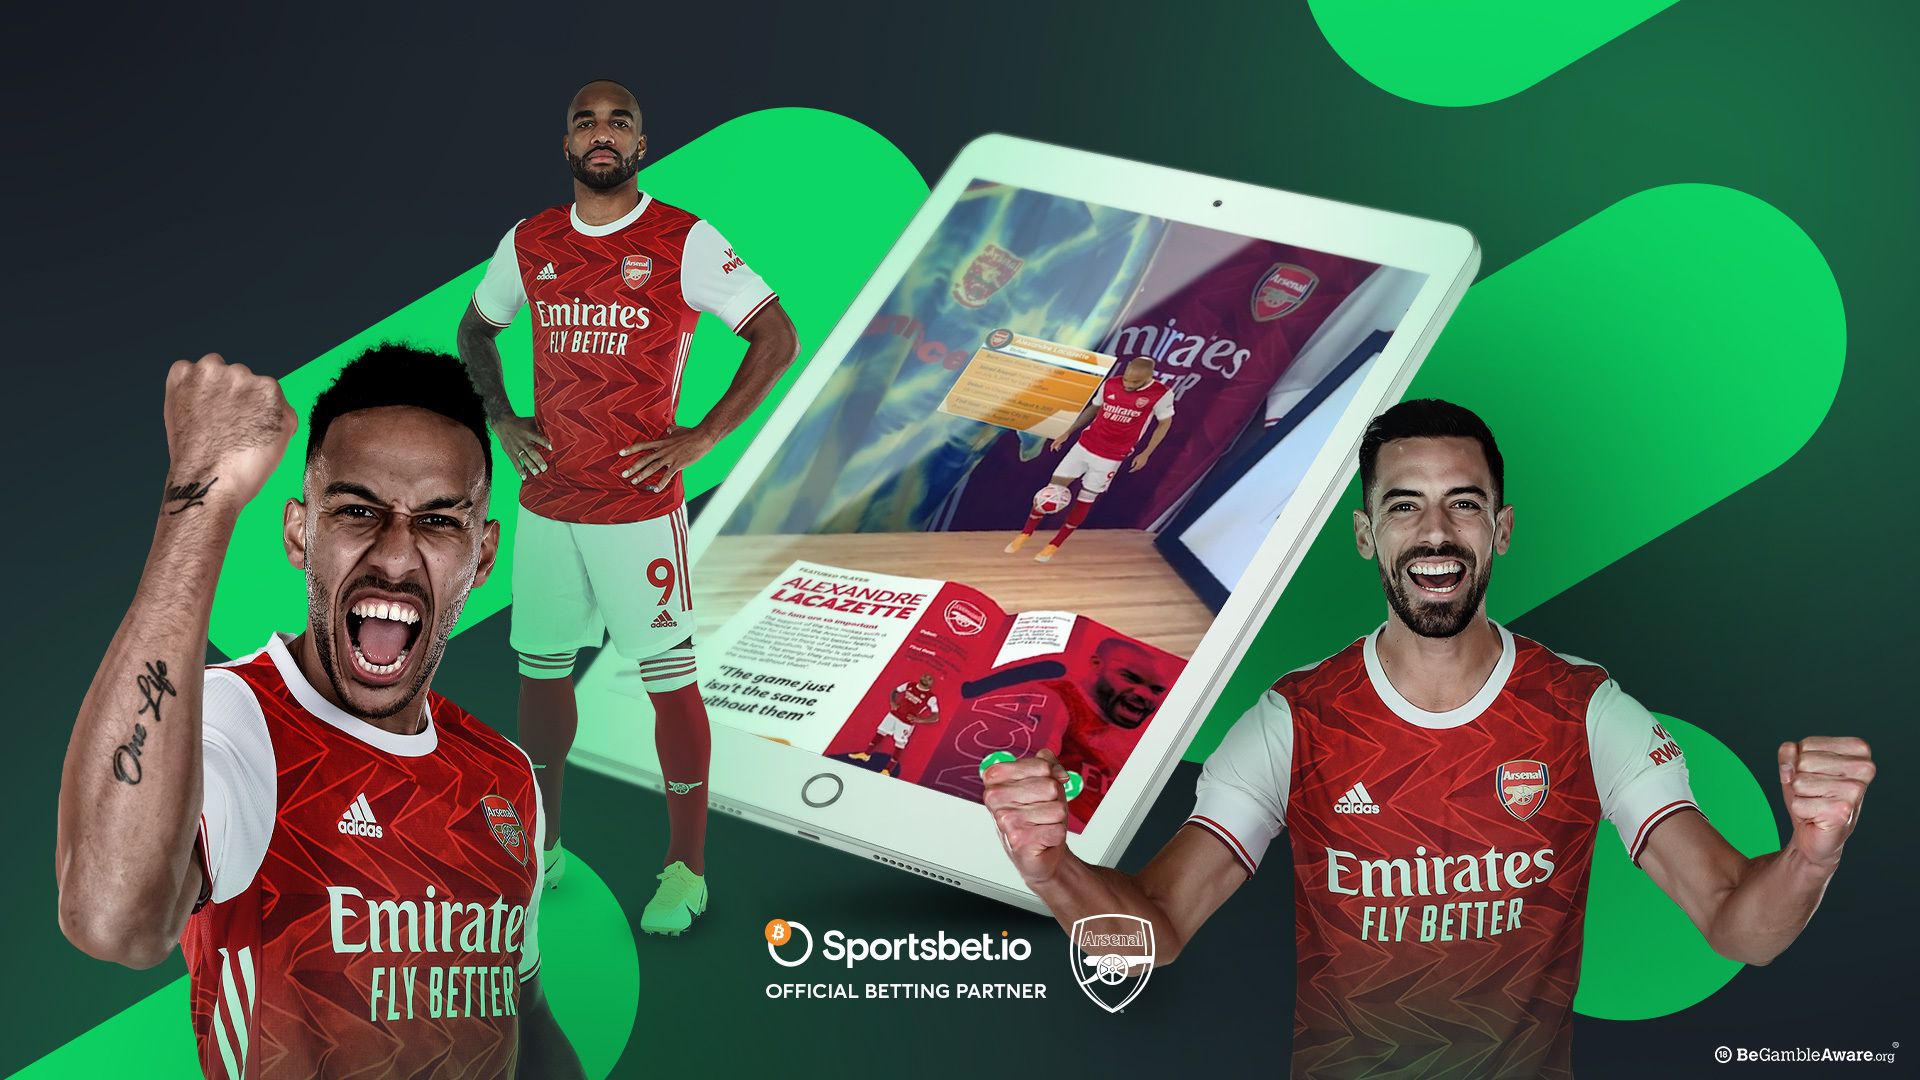 Sportsbet.io and Arsenal FC launch new augmented reality matchday programme